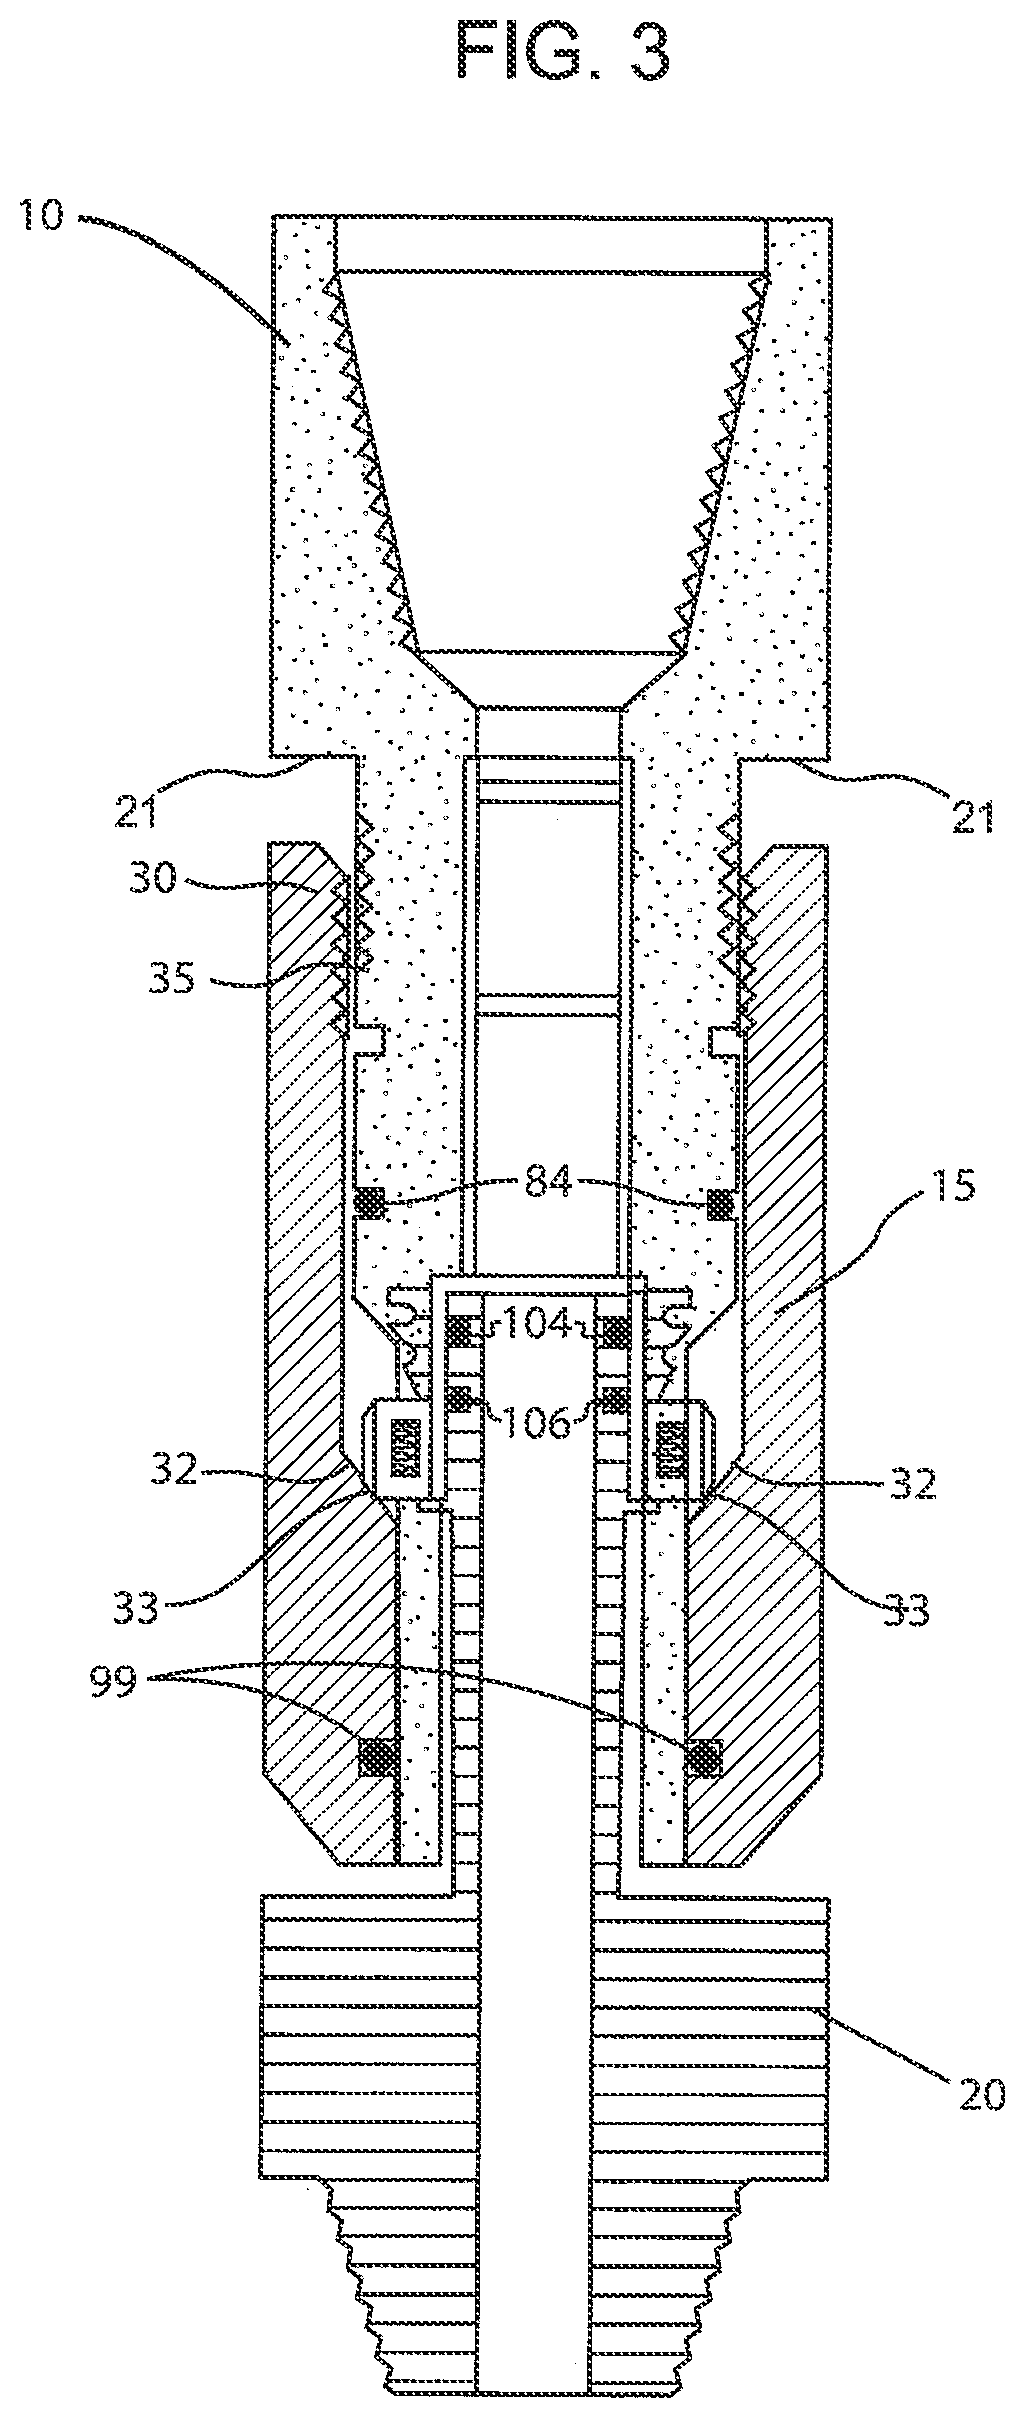 Manual pipe valve connector for jointed pipe connections with quick release check valve assembly and uses thereof